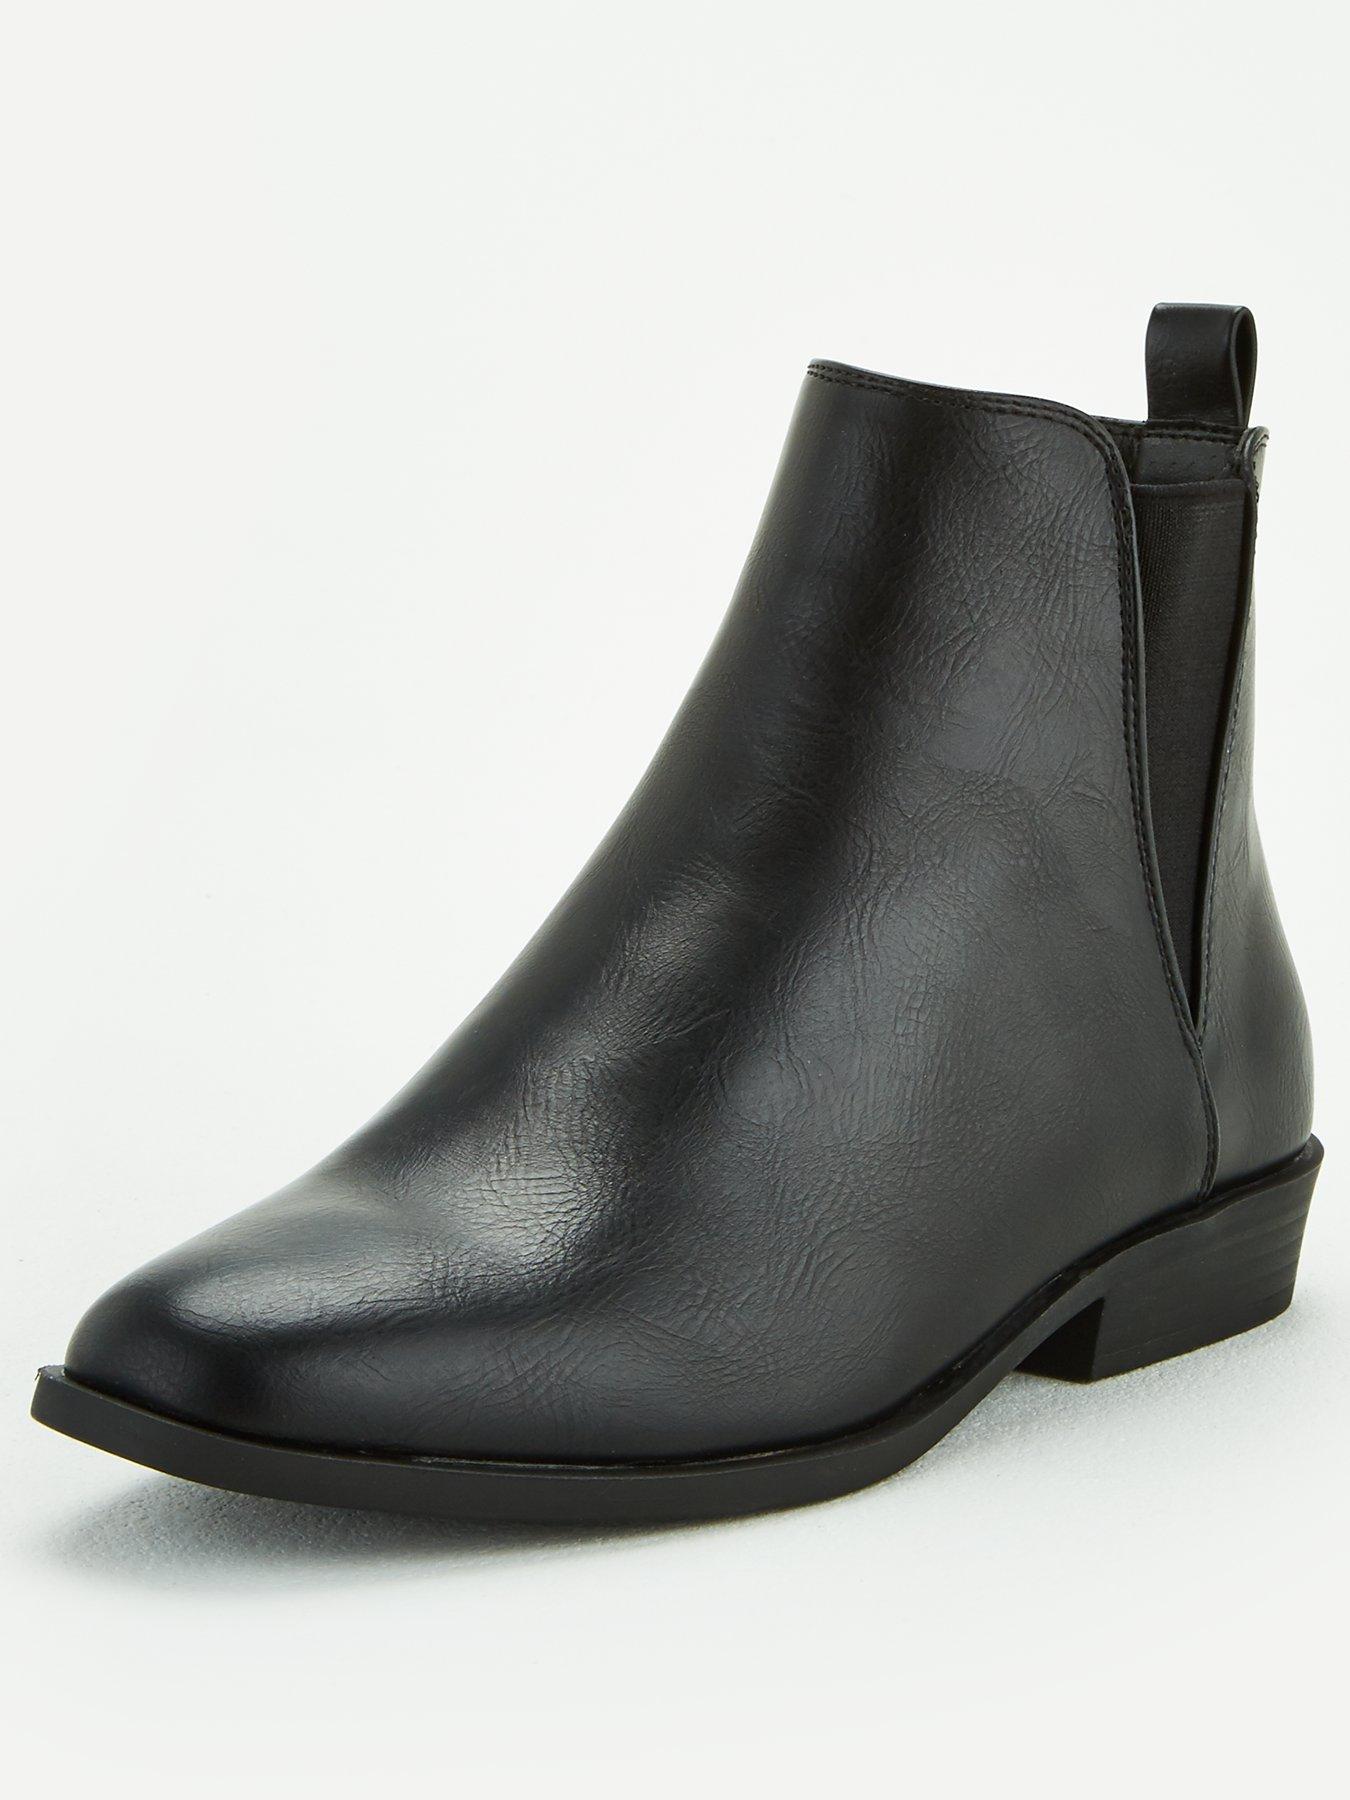 V by Very Chelsea Ankle Boots - Black 